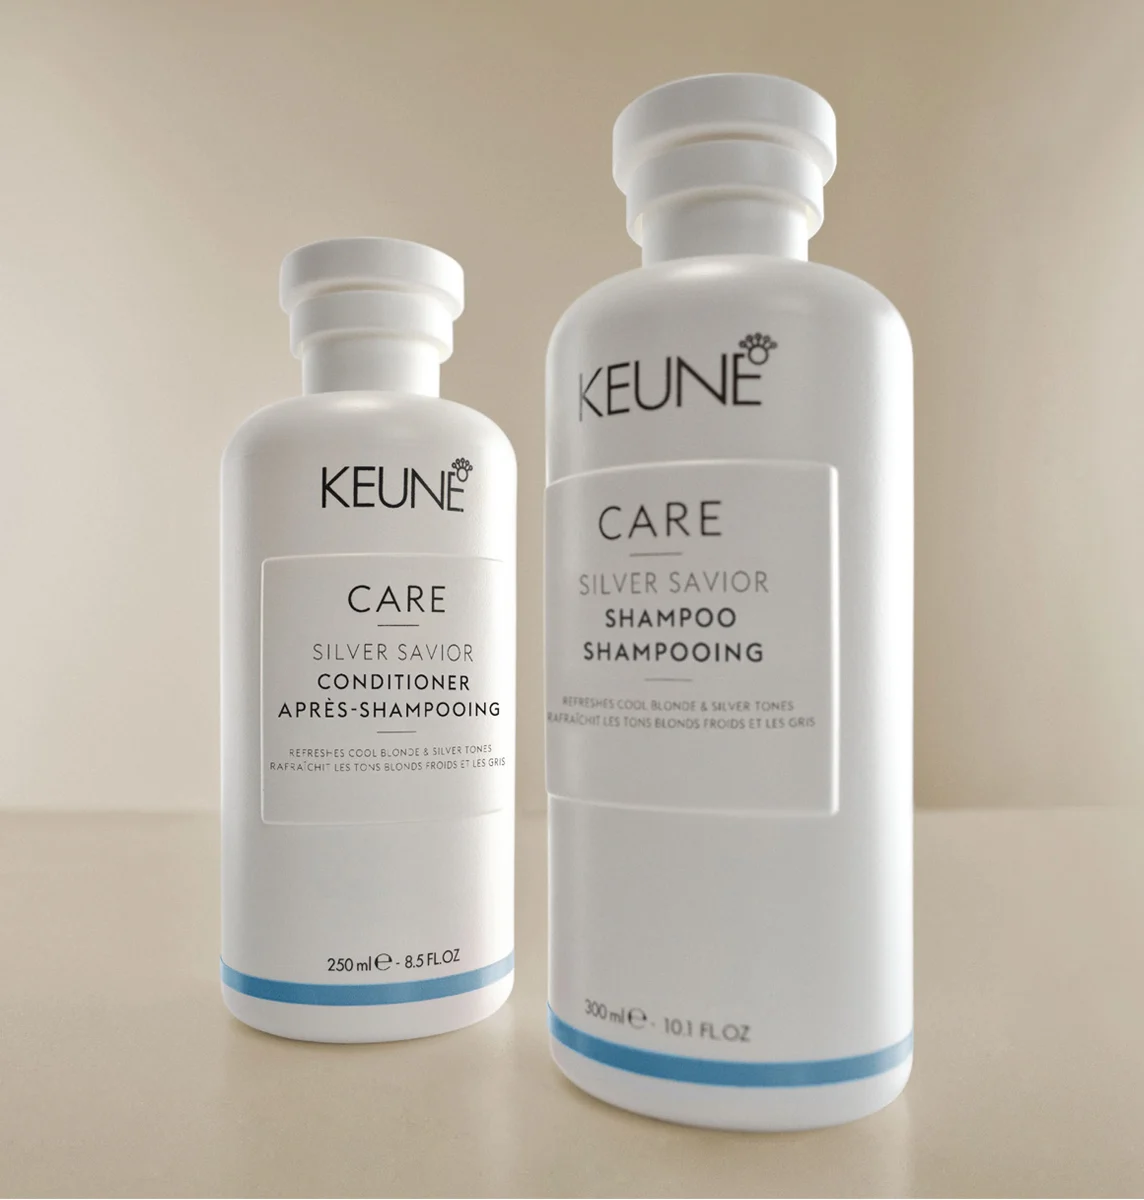 Image of bottles Keune Care Silver Savior Shampoo and Conditioner with 